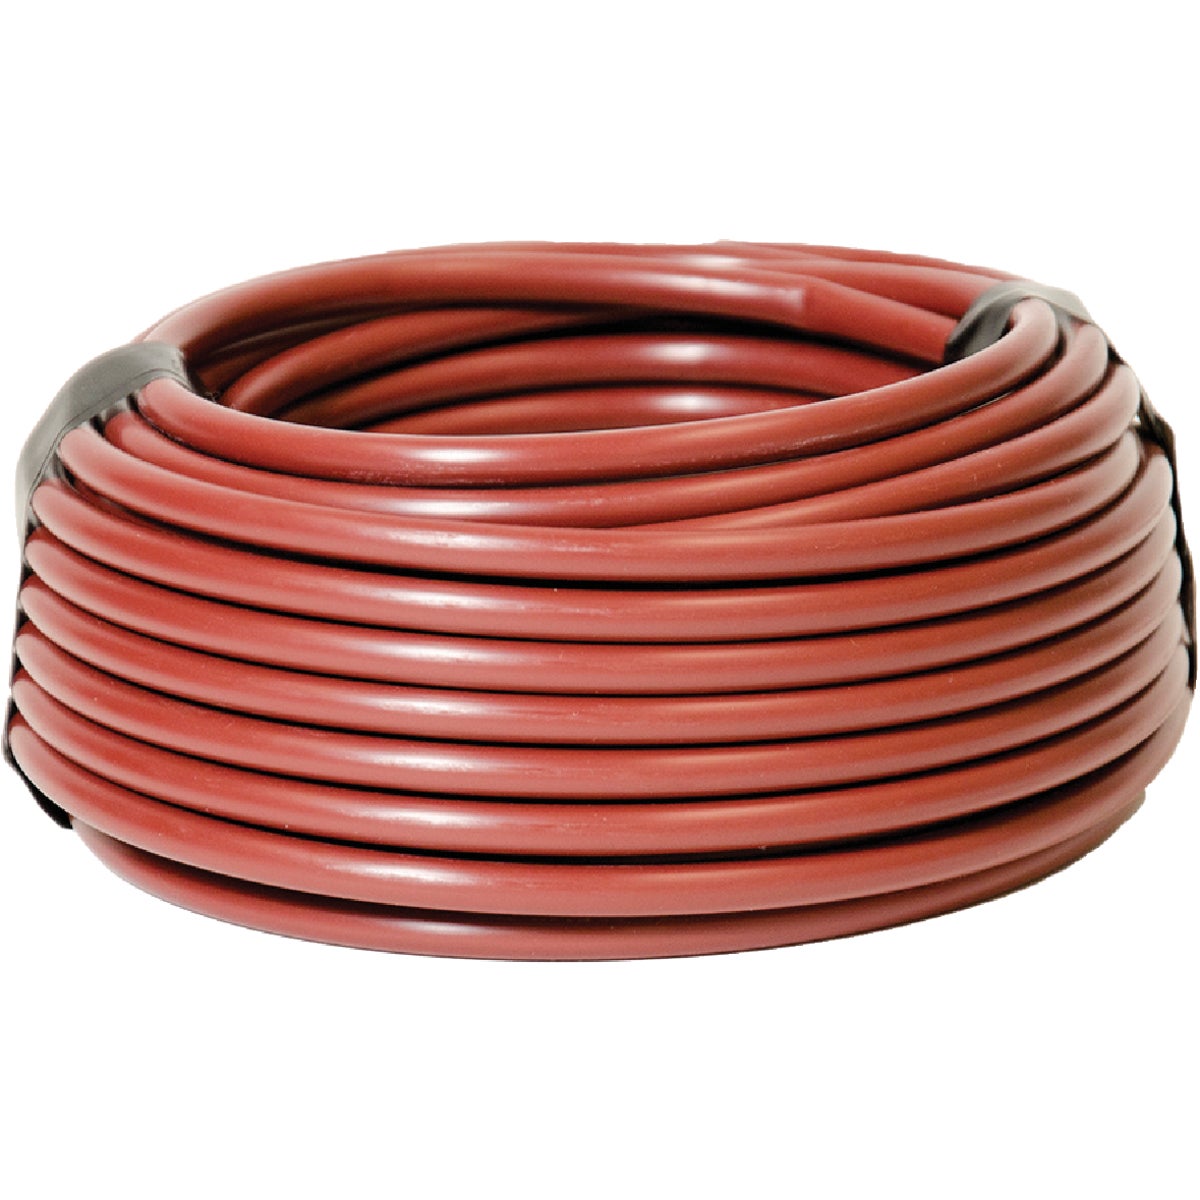 Item 710957, Drip hose manufactured from linear, low-density polyethylene.